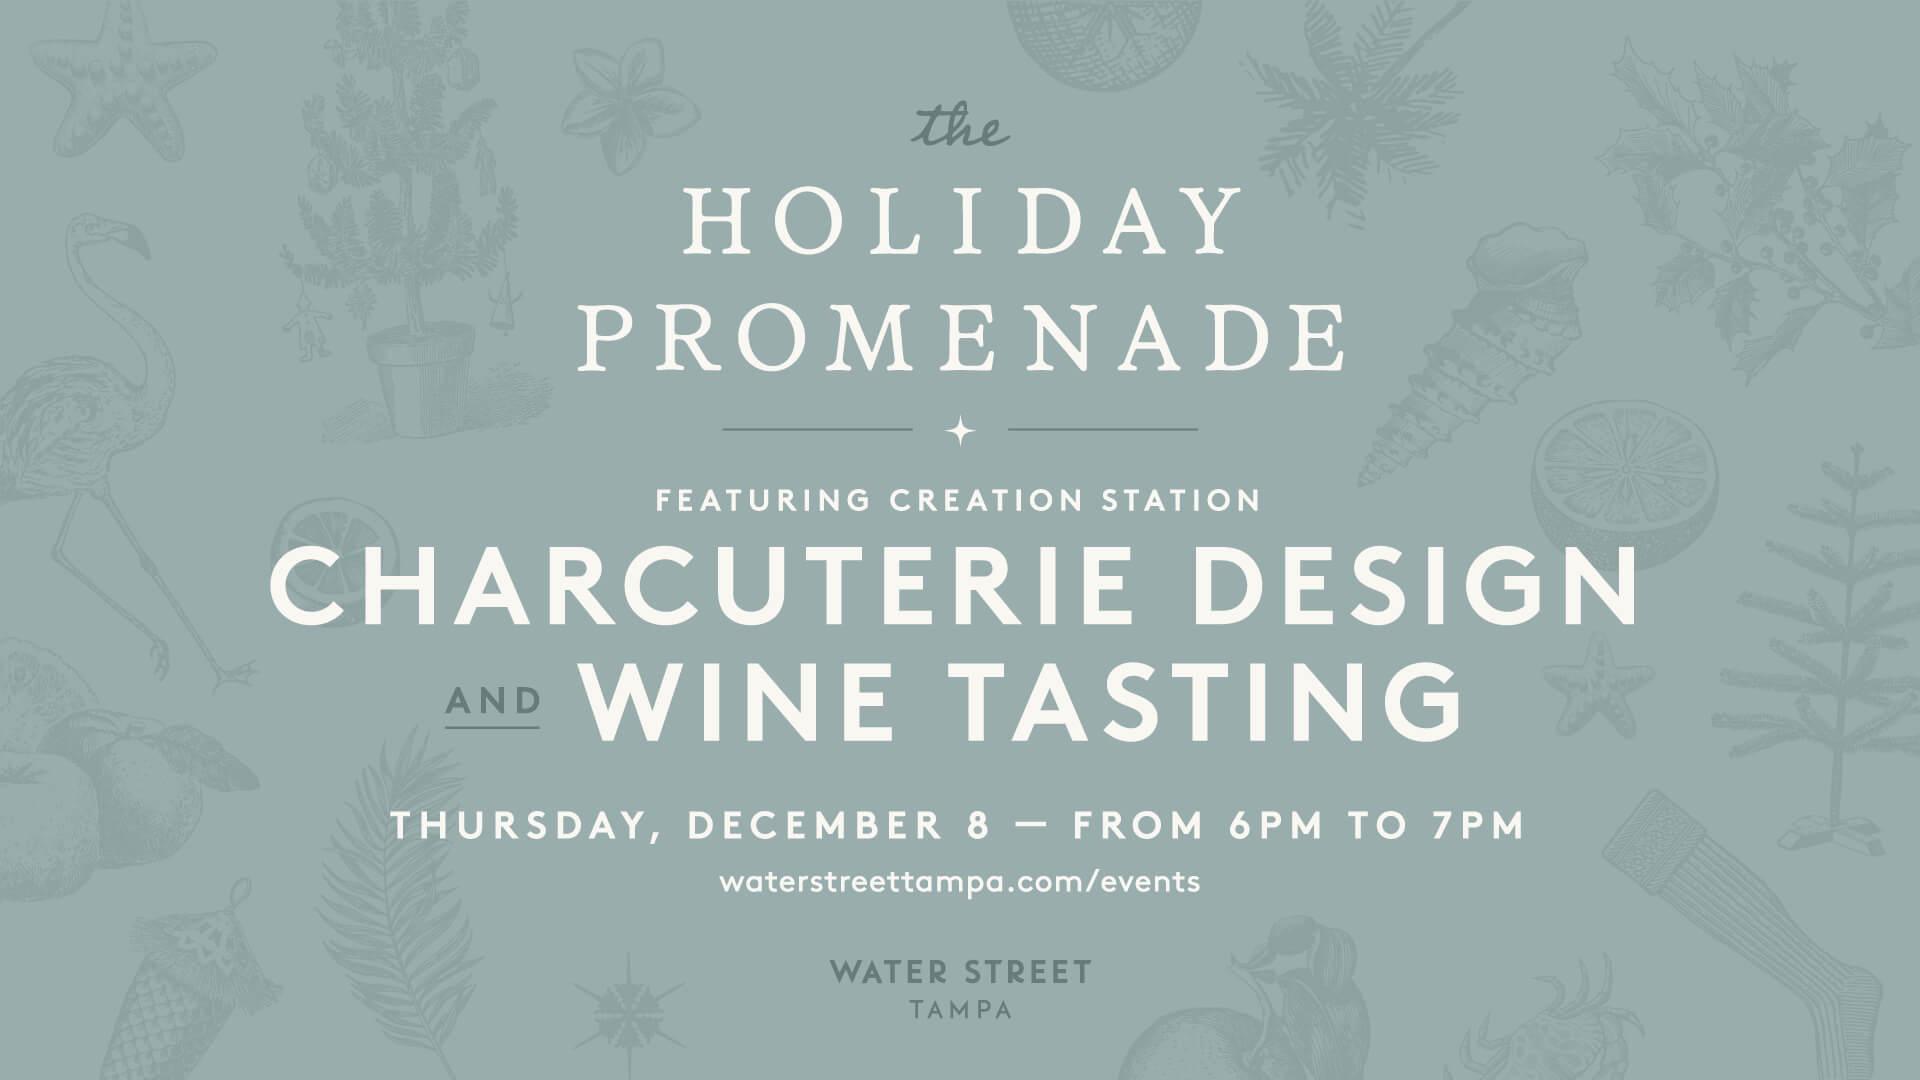 The Holiday Promenade - Charcuterie Design and Wine Tasting